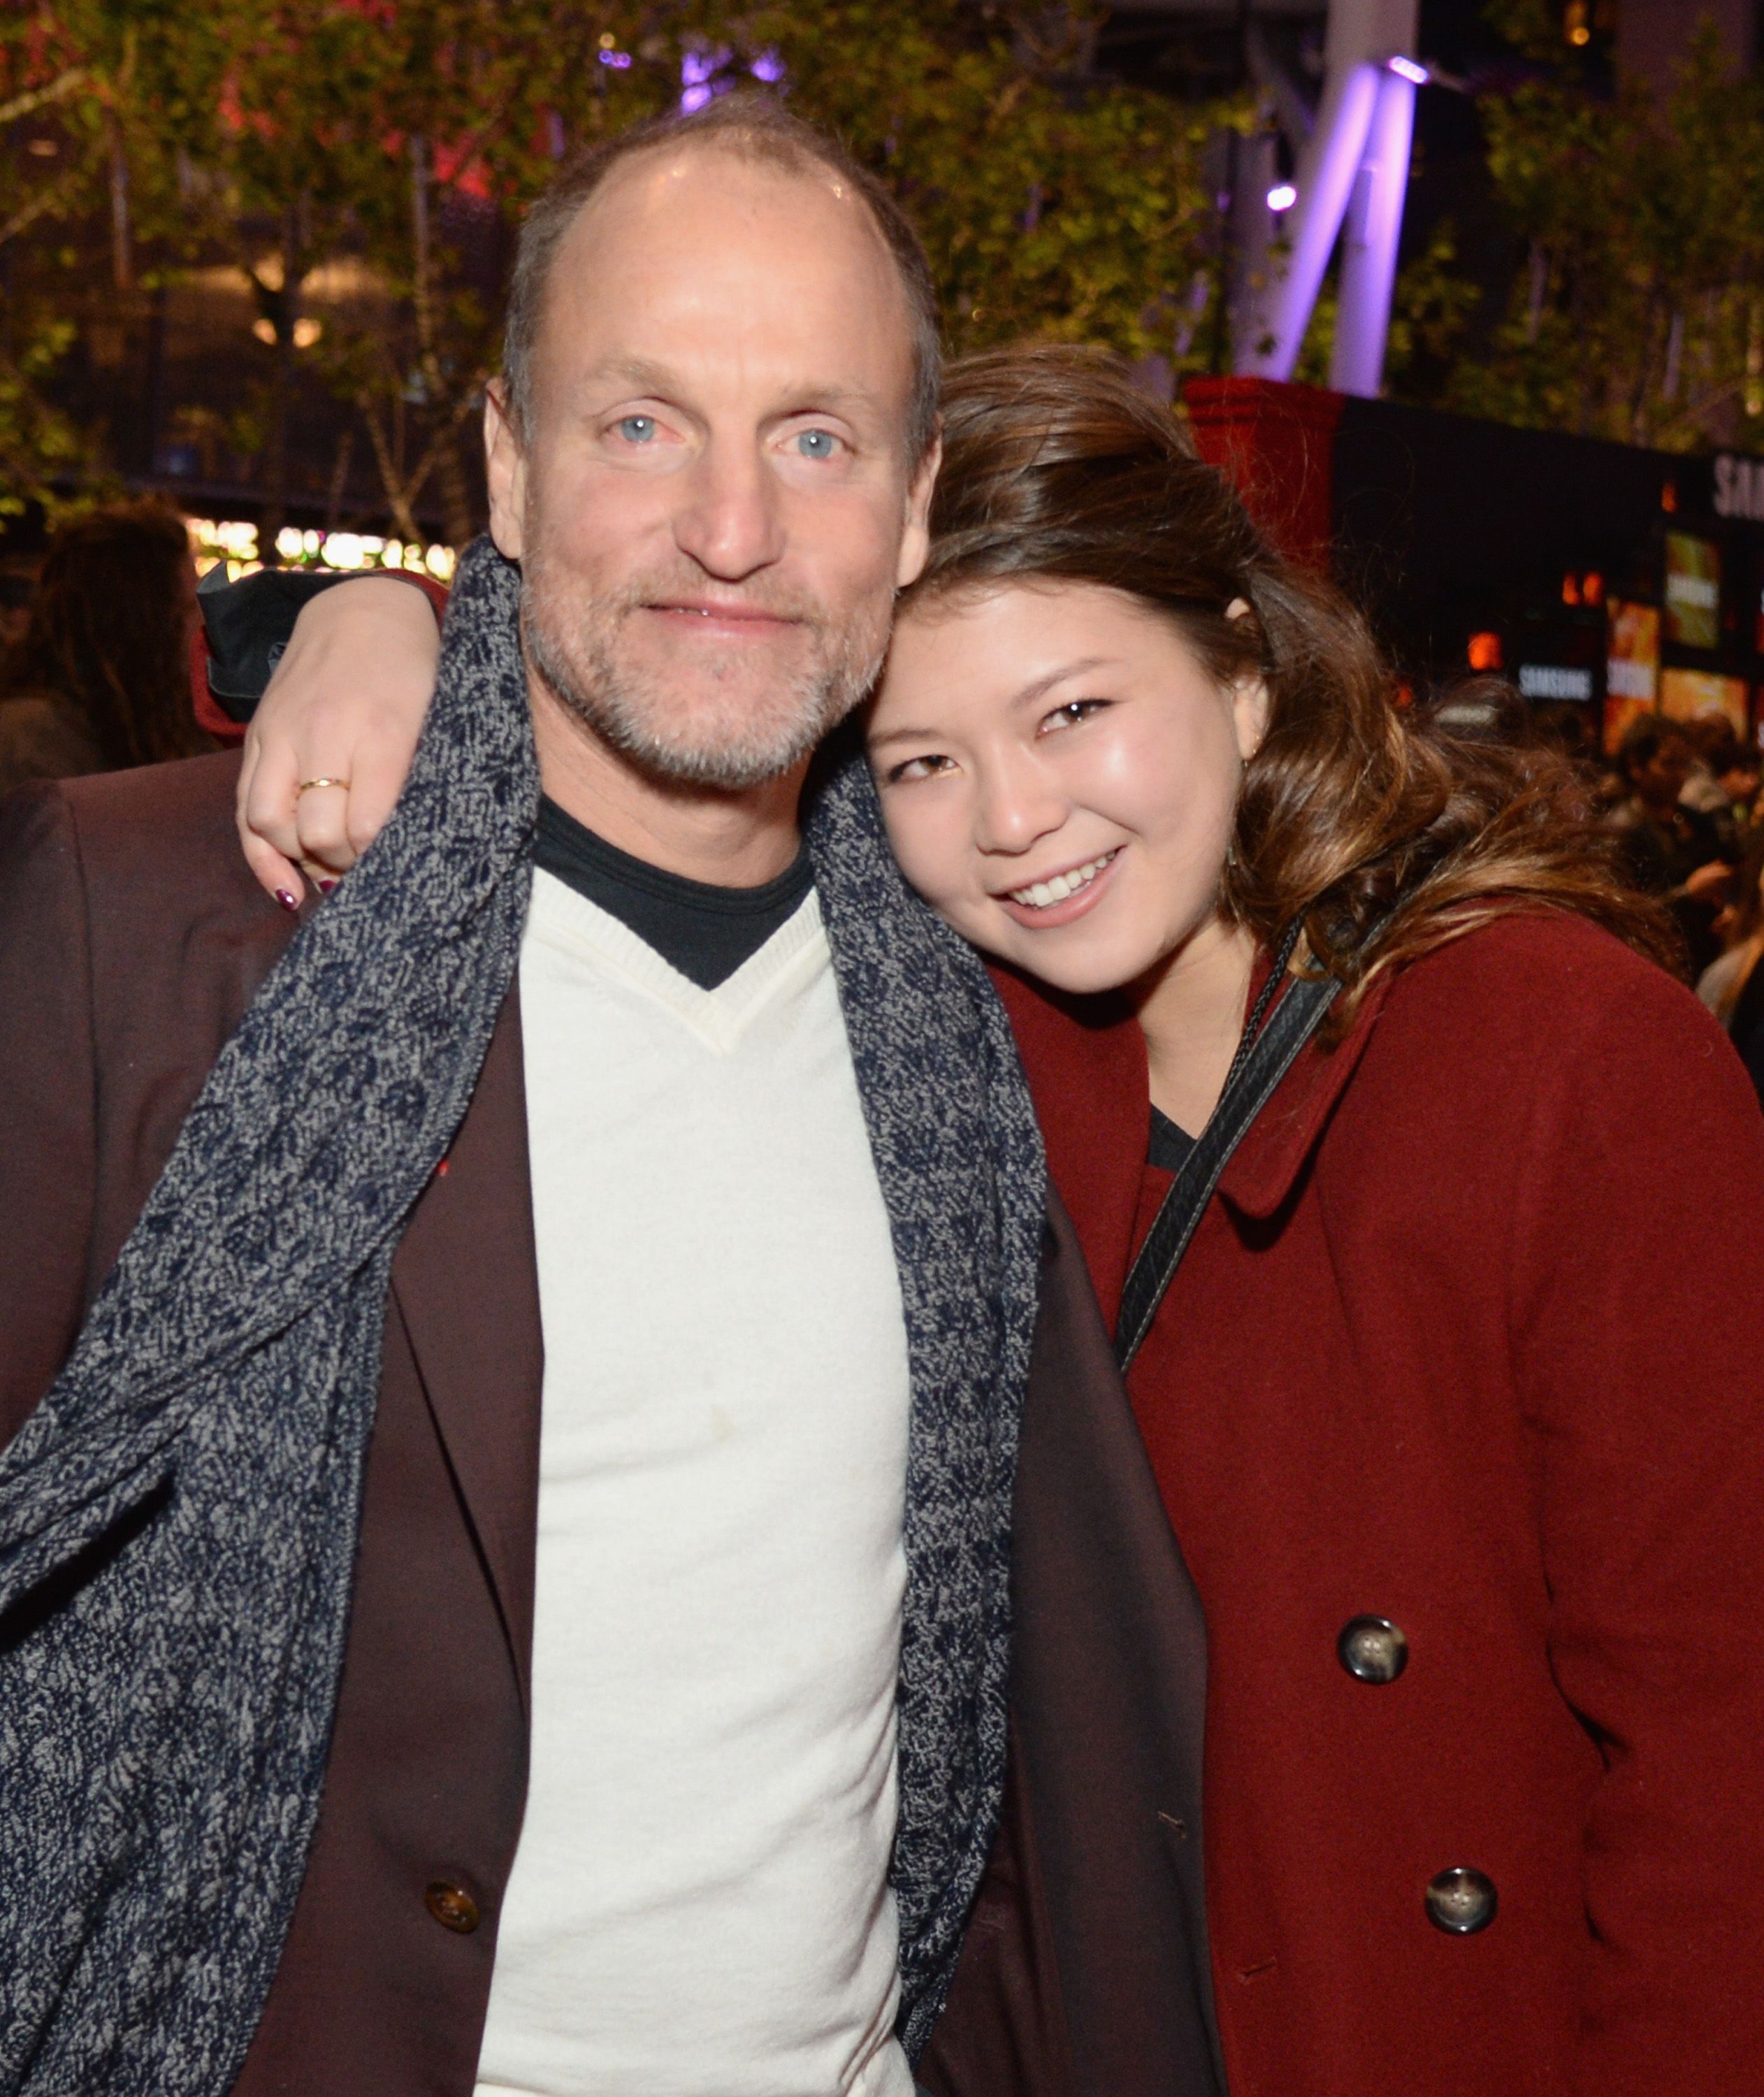 Woody Harrelson and Zoe Harrelson during "Hunger Games: Mockingjay Part 2" Los Angeles Premiere on November 16, 2015, in Los Angeles, California. | Source: Getty Images